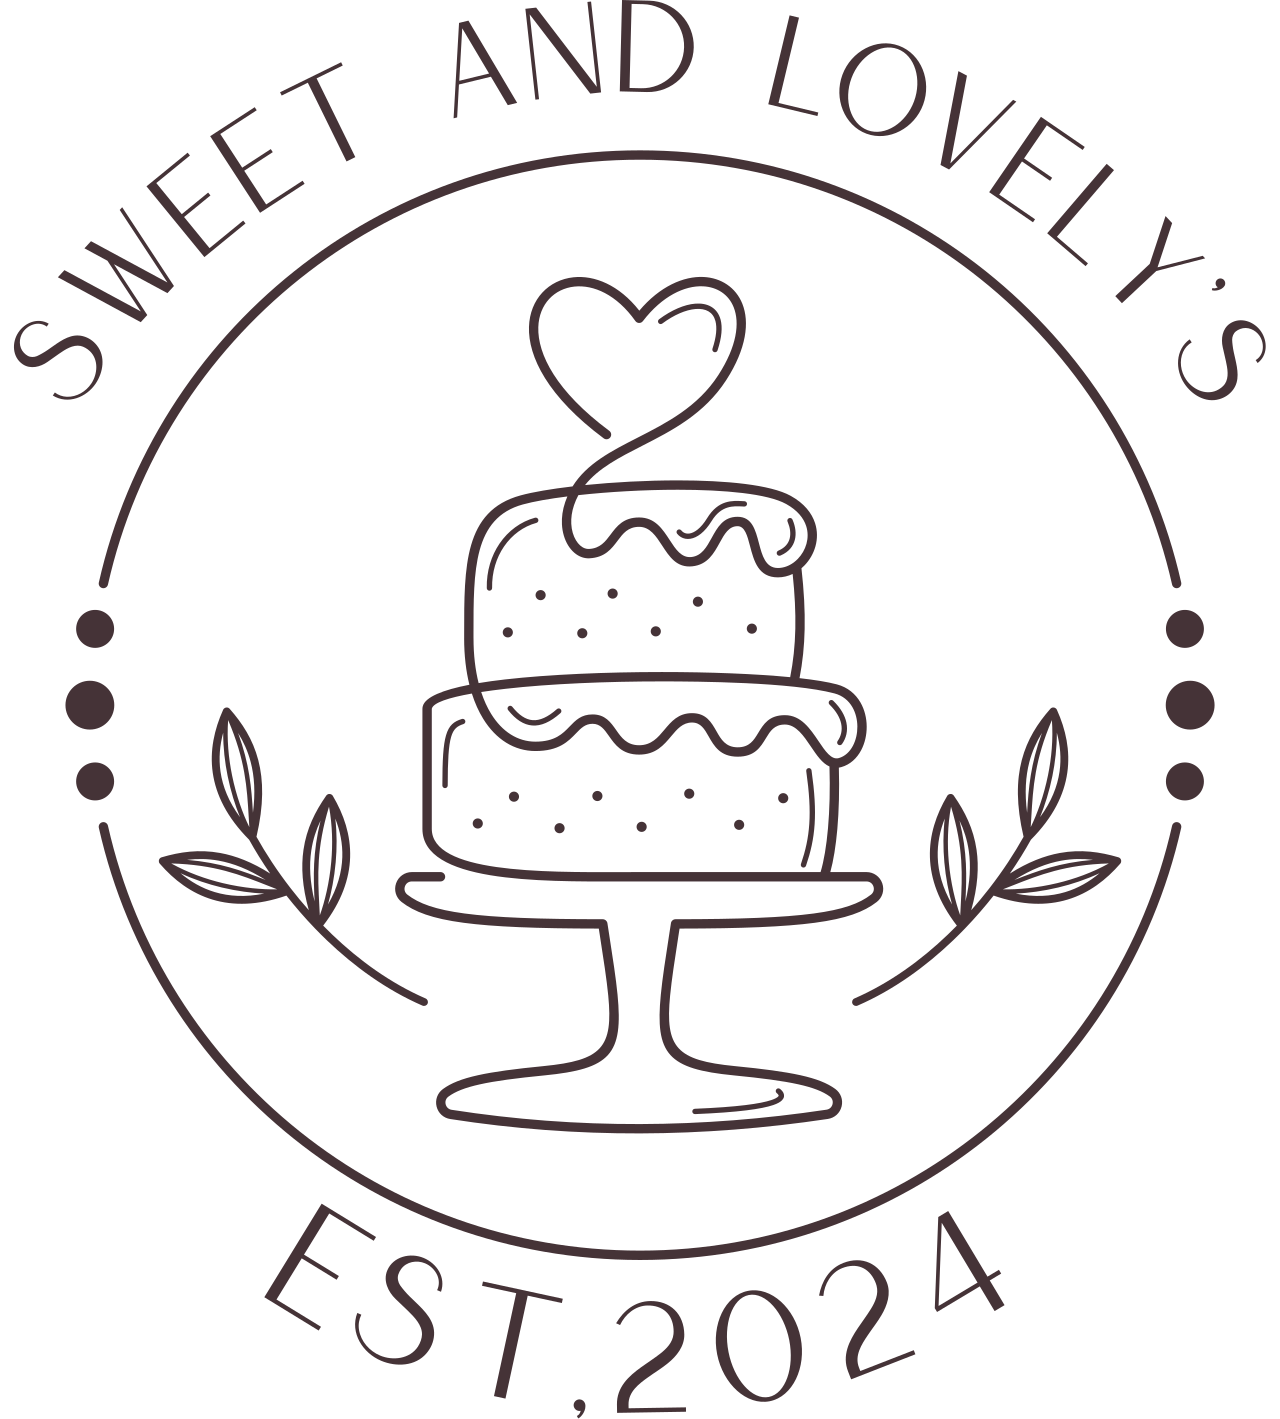 SWEET AND LOVELY’S's logo